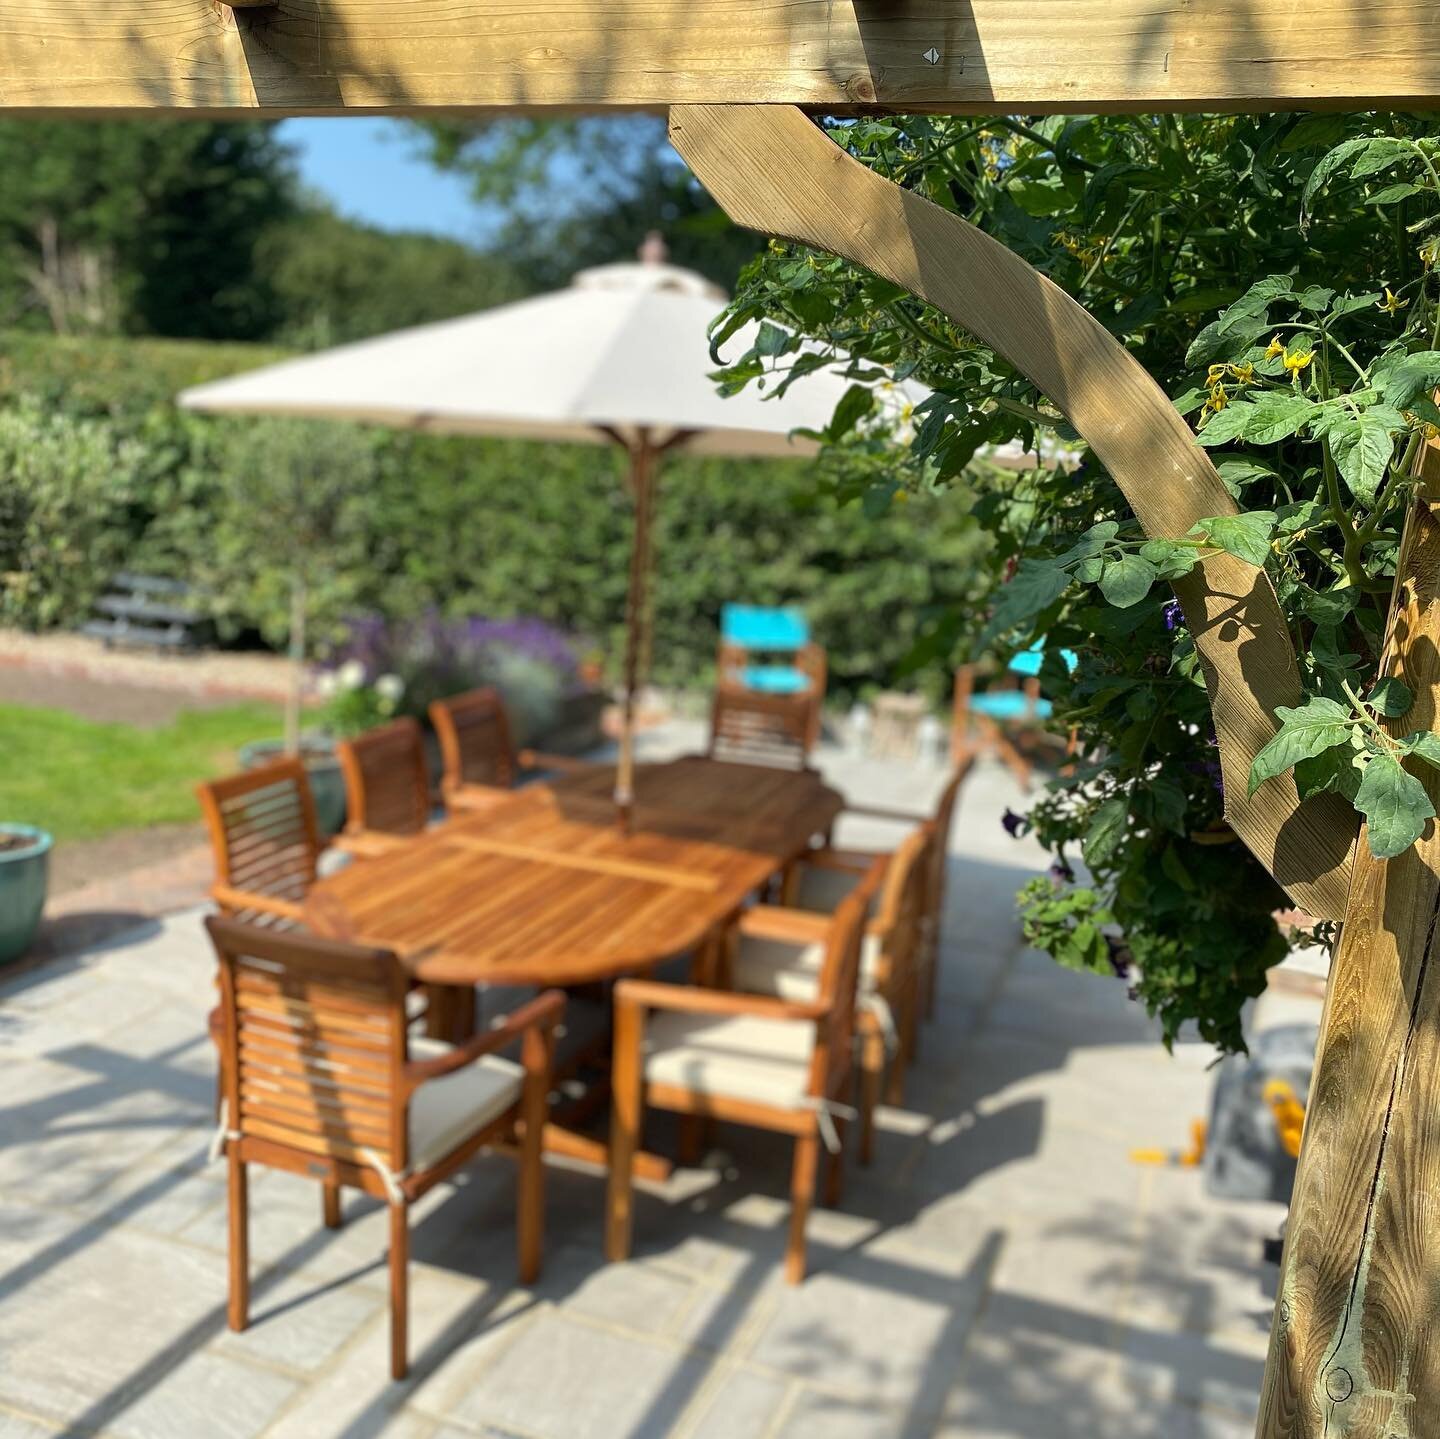 This beautiful garden in South Godstone now has this wonderful Indian sandstone patio @fairallsbuildersmerchants , sleeper raised beds &amp; pergola @tatefencing to give it the perfect area to sit, enjoy and relax in. Is your garden summer ready? Con